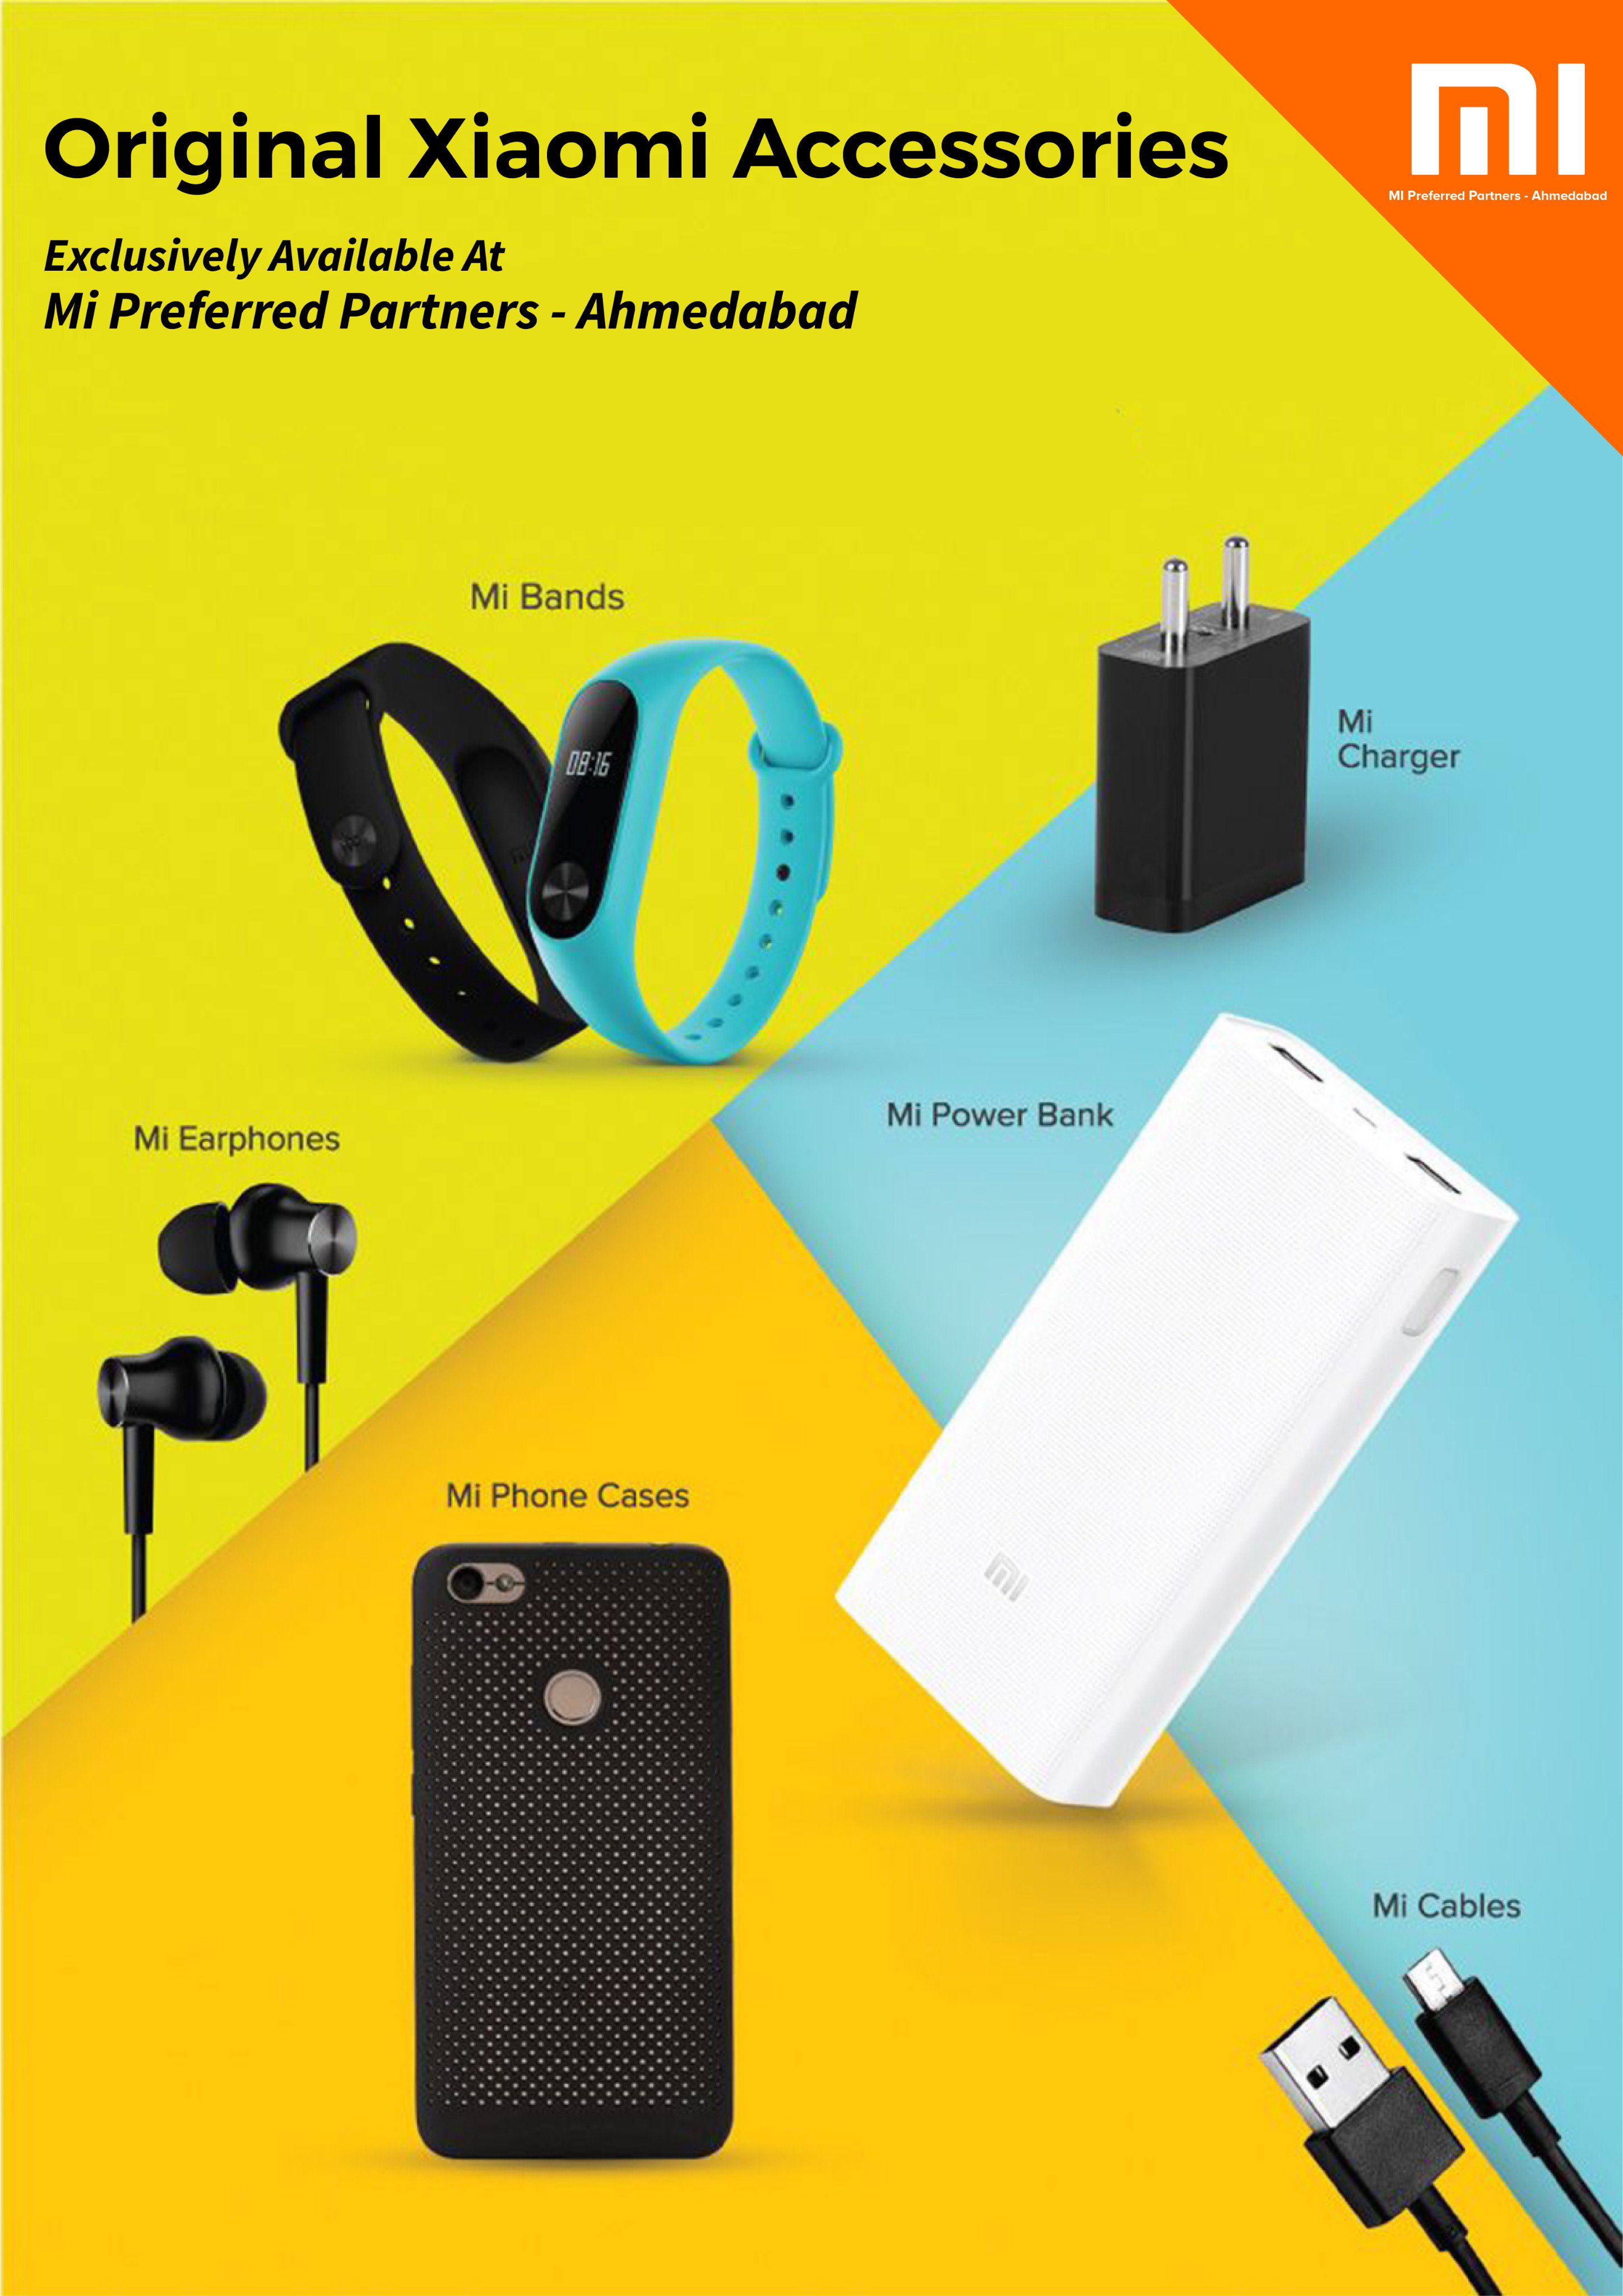 fly Strålende valg Mi Store Ahmedabad - MIPP on Twitter: "Buy Original Xiaomi Accessories  exclusively at Mi Preferred Partner stores - Ahmedabad near you. Honest  Pricing, Genuine Products. #MiPreferrredPartner #miahmedabad  #mistoreahmedabad #xiaomi #mi #redmi #ahmedabad